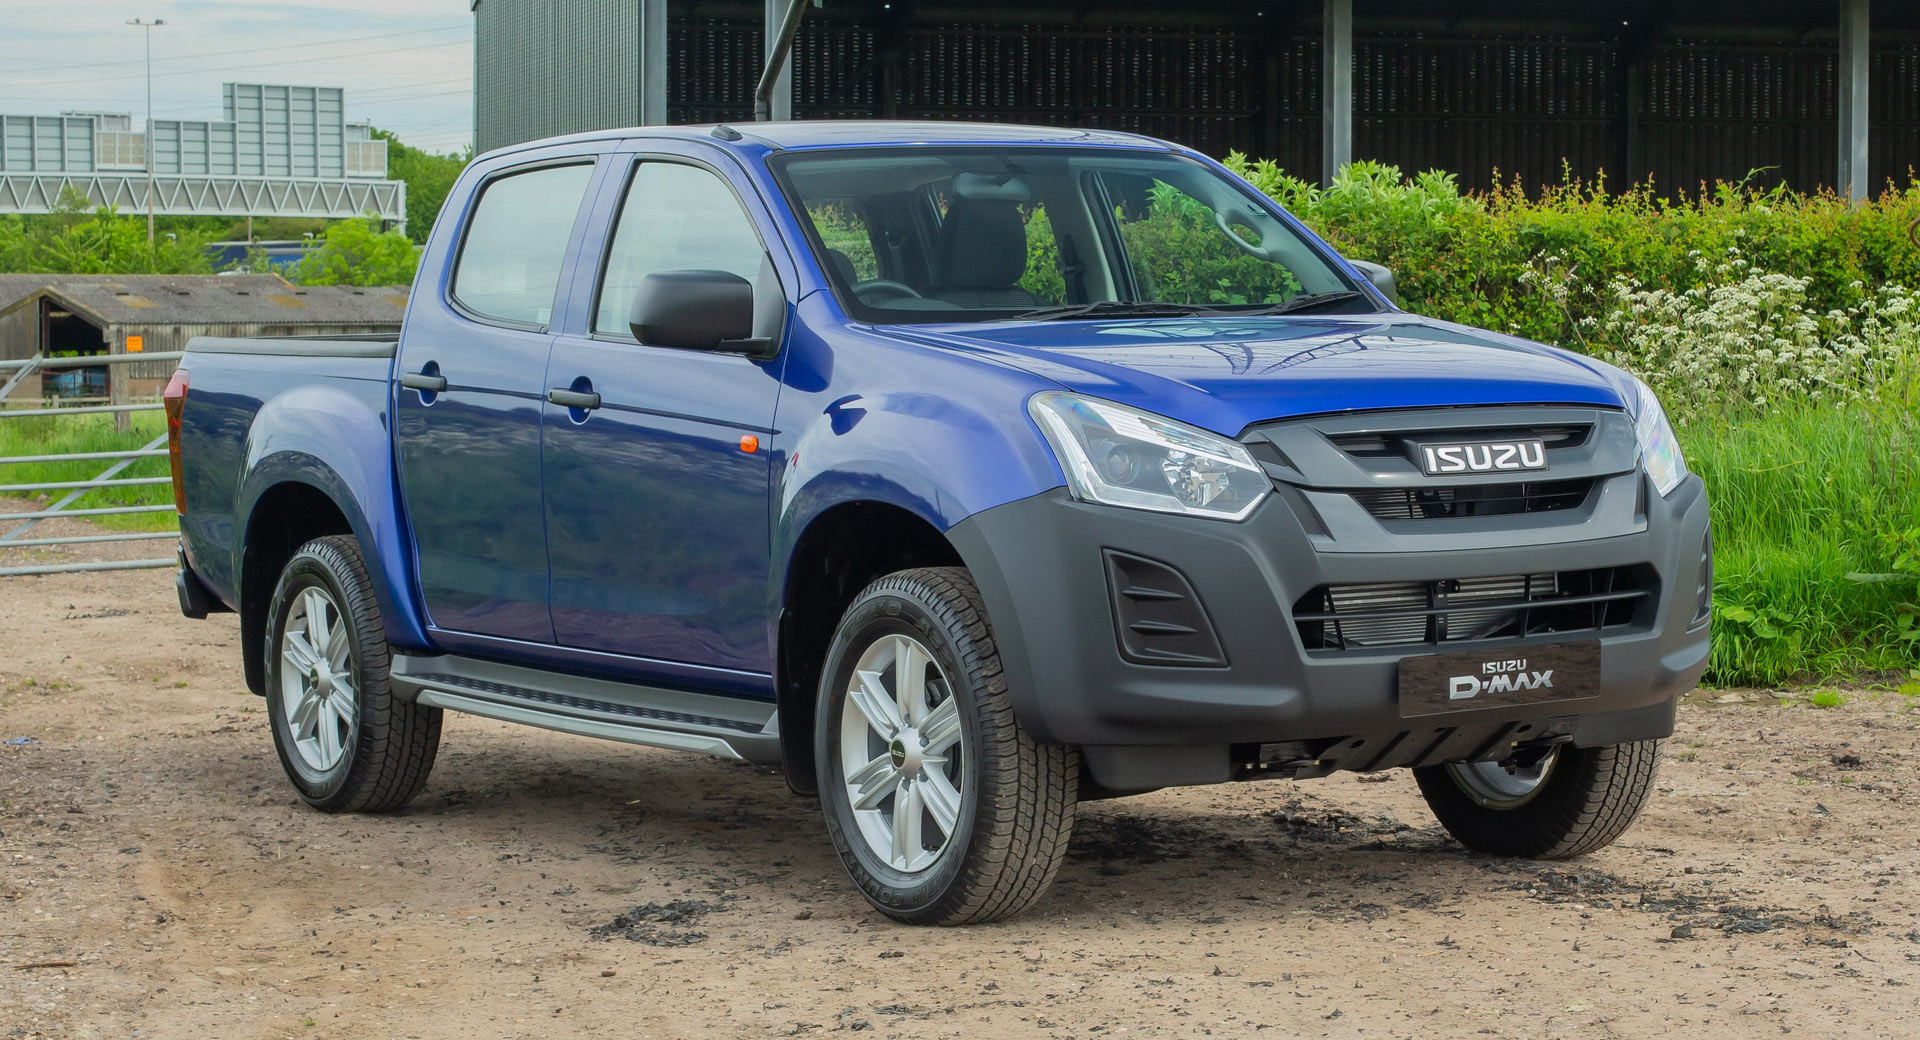 Isuzu DMax Workman+ Is A Practical Special Edition Truck For The UK